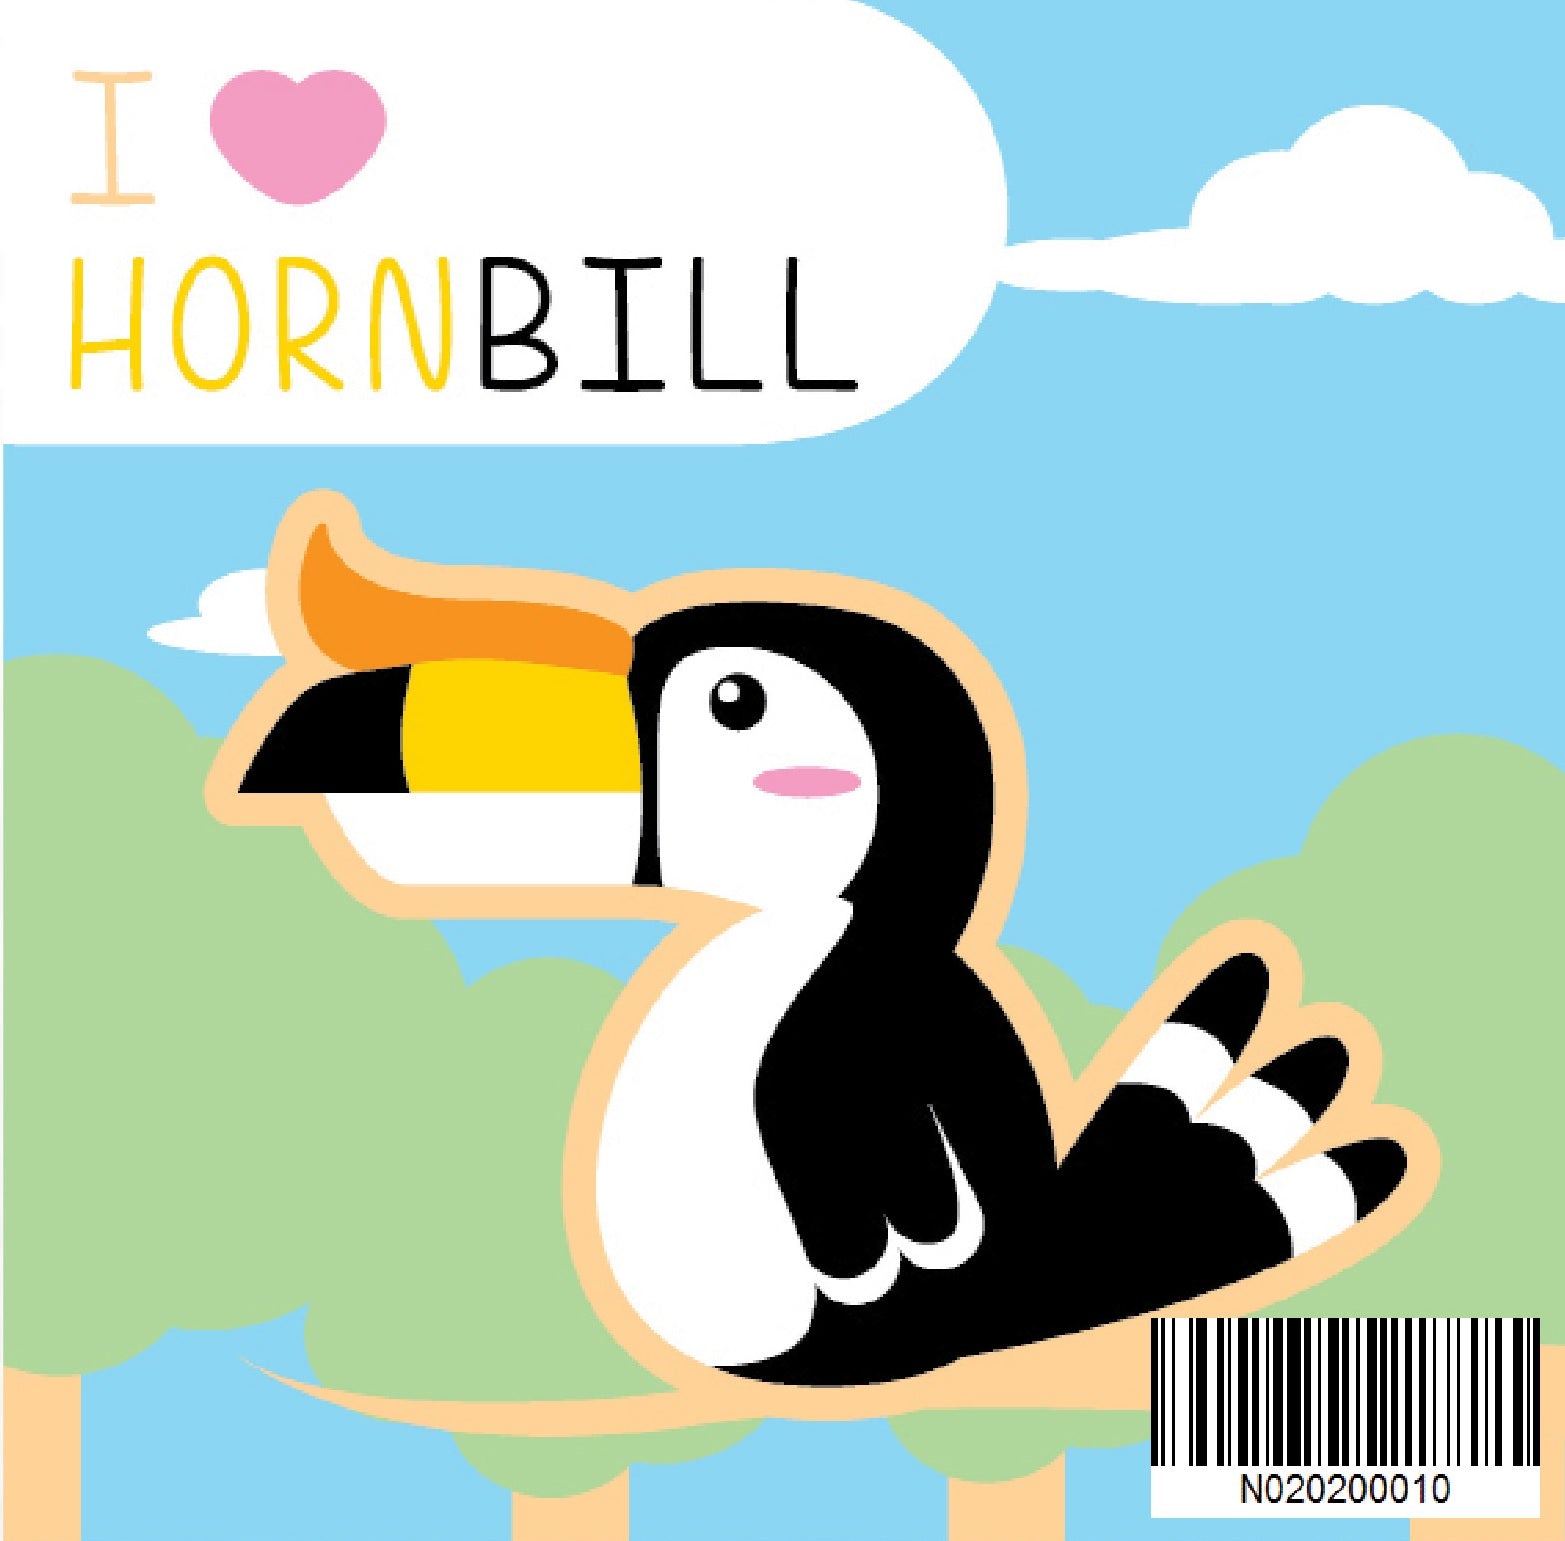 N02020010 I Love Hornbill Malaysia Series Small Size Number Painting (20x20cm)